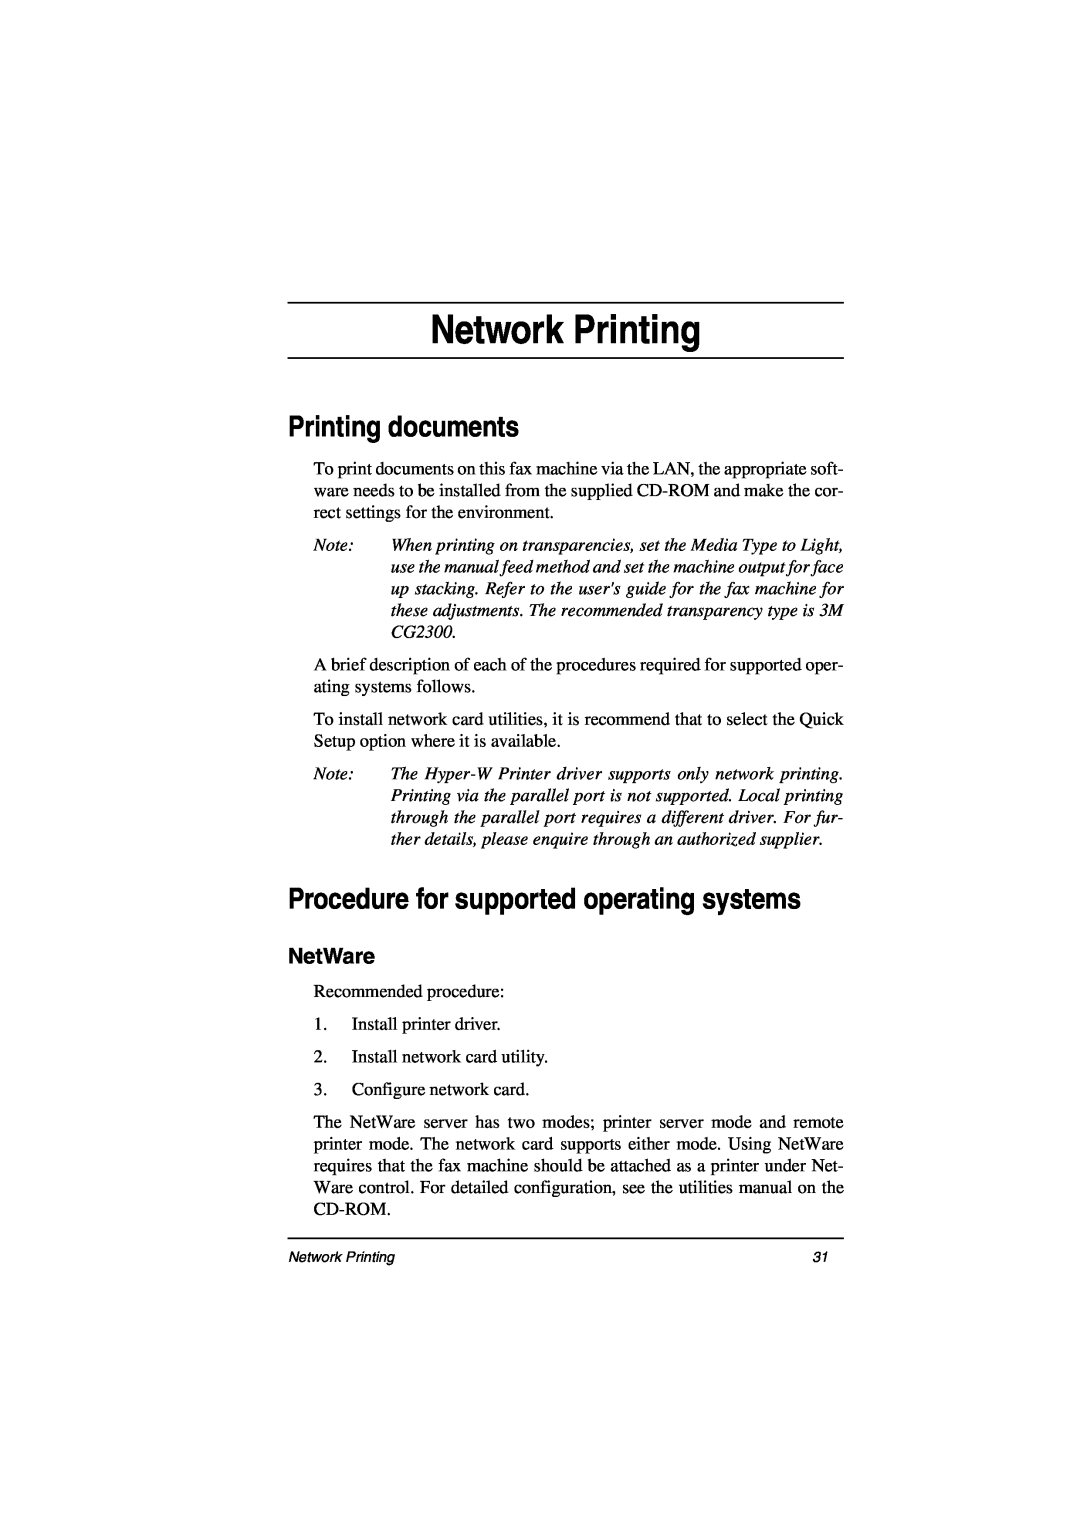 Oki ii manual Network Printing, Printing documents, Procedure for supported operating systems, NetWare 